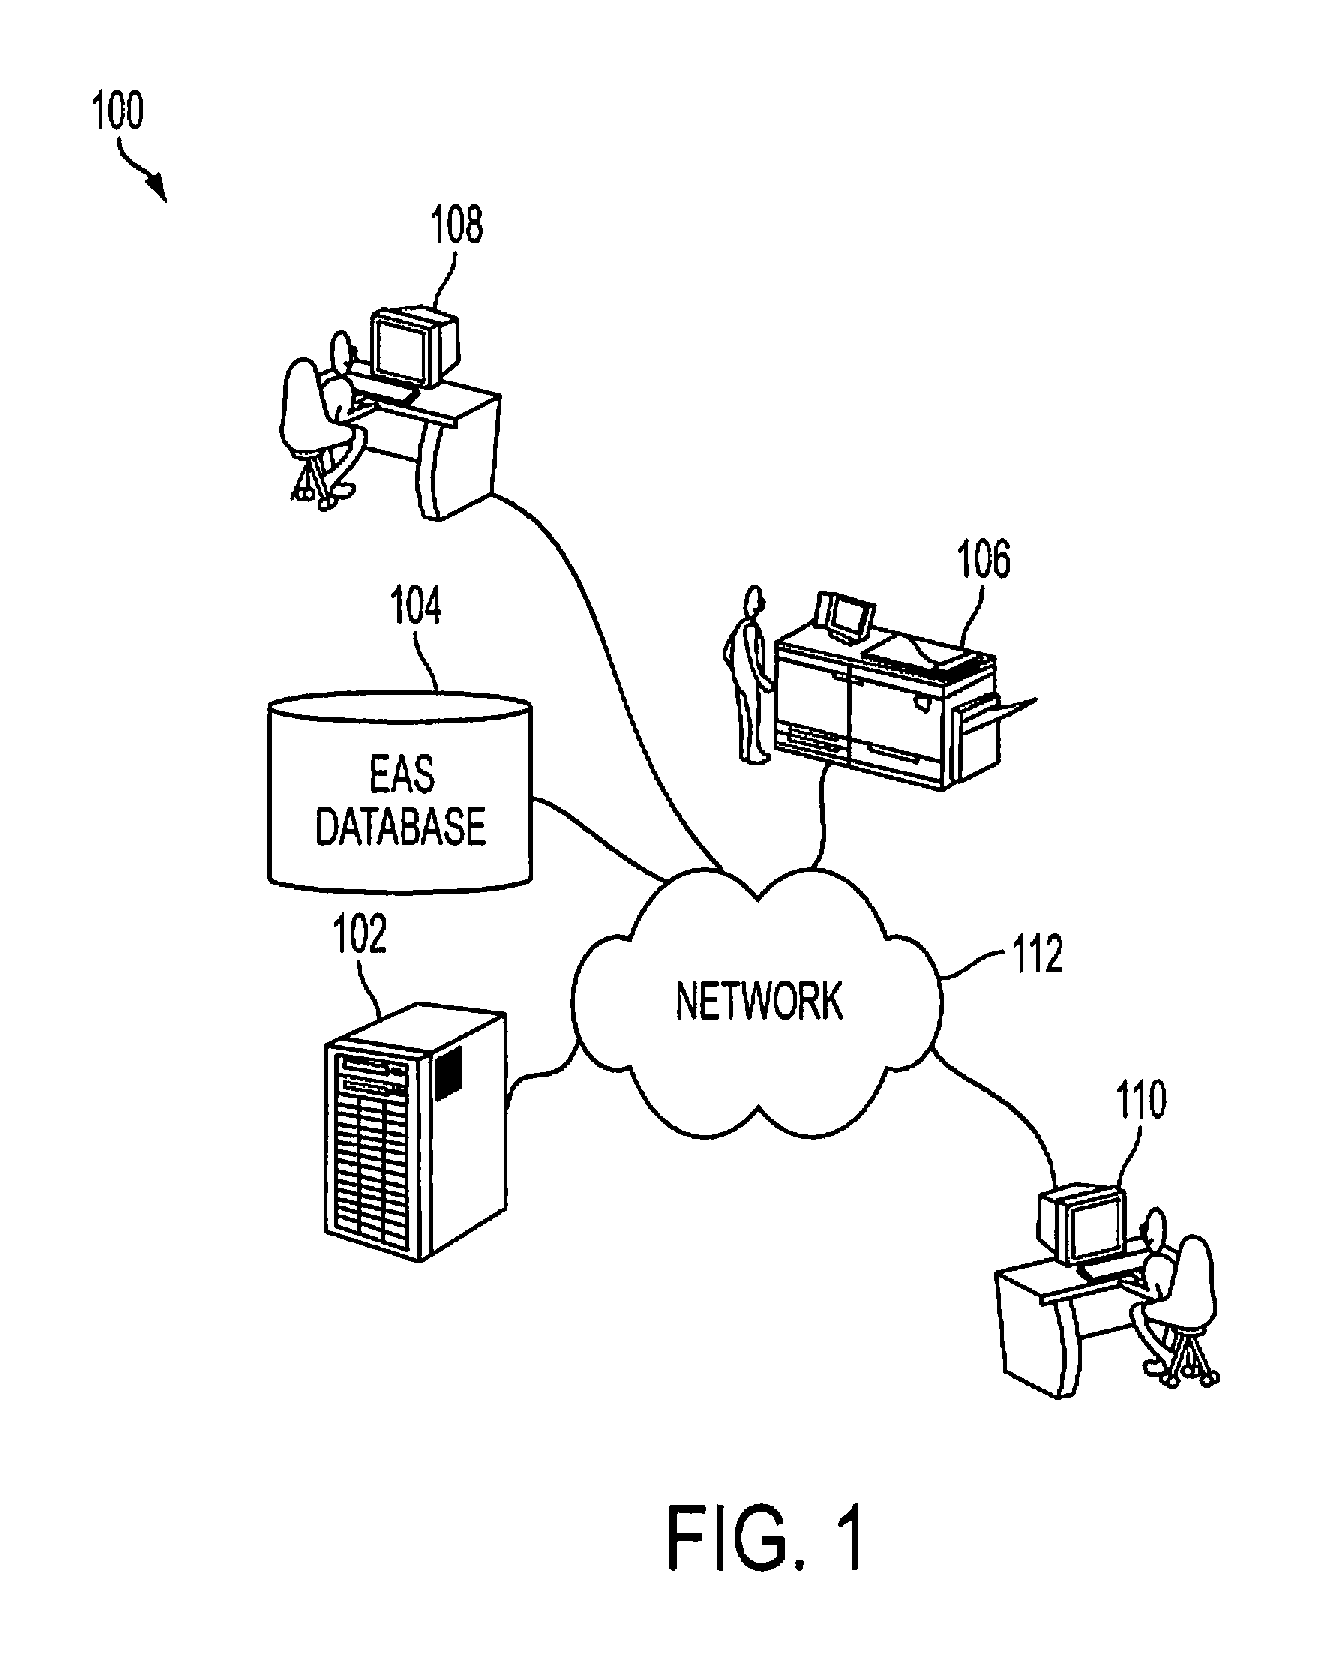 System and method for generating individualized educational practice worksheets